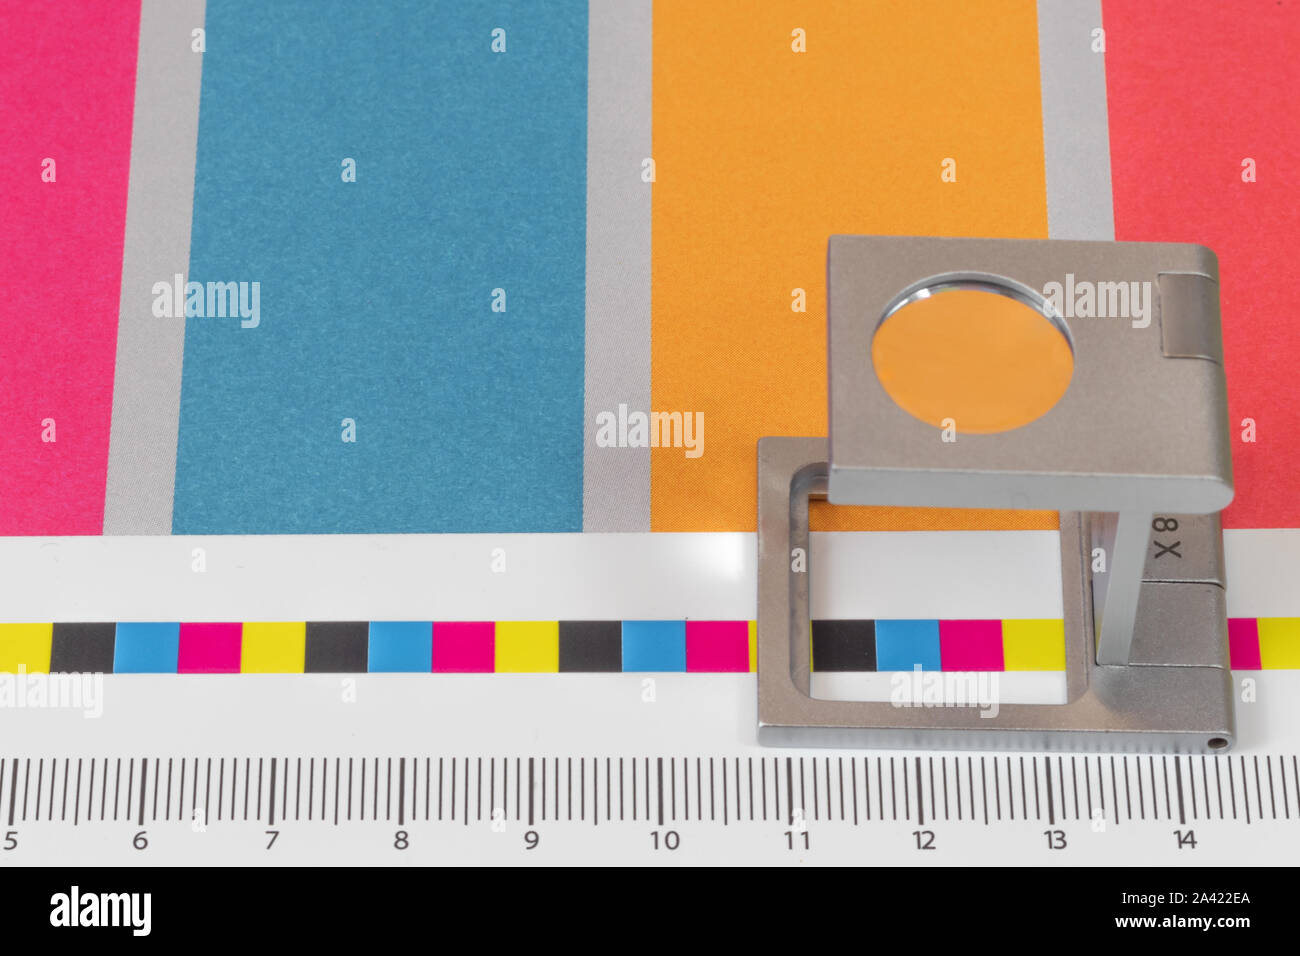 Silver magnifying glass standing on the test print, colored background. Print loupe on offset printed sheet with basic colors control bars. Stock Photo